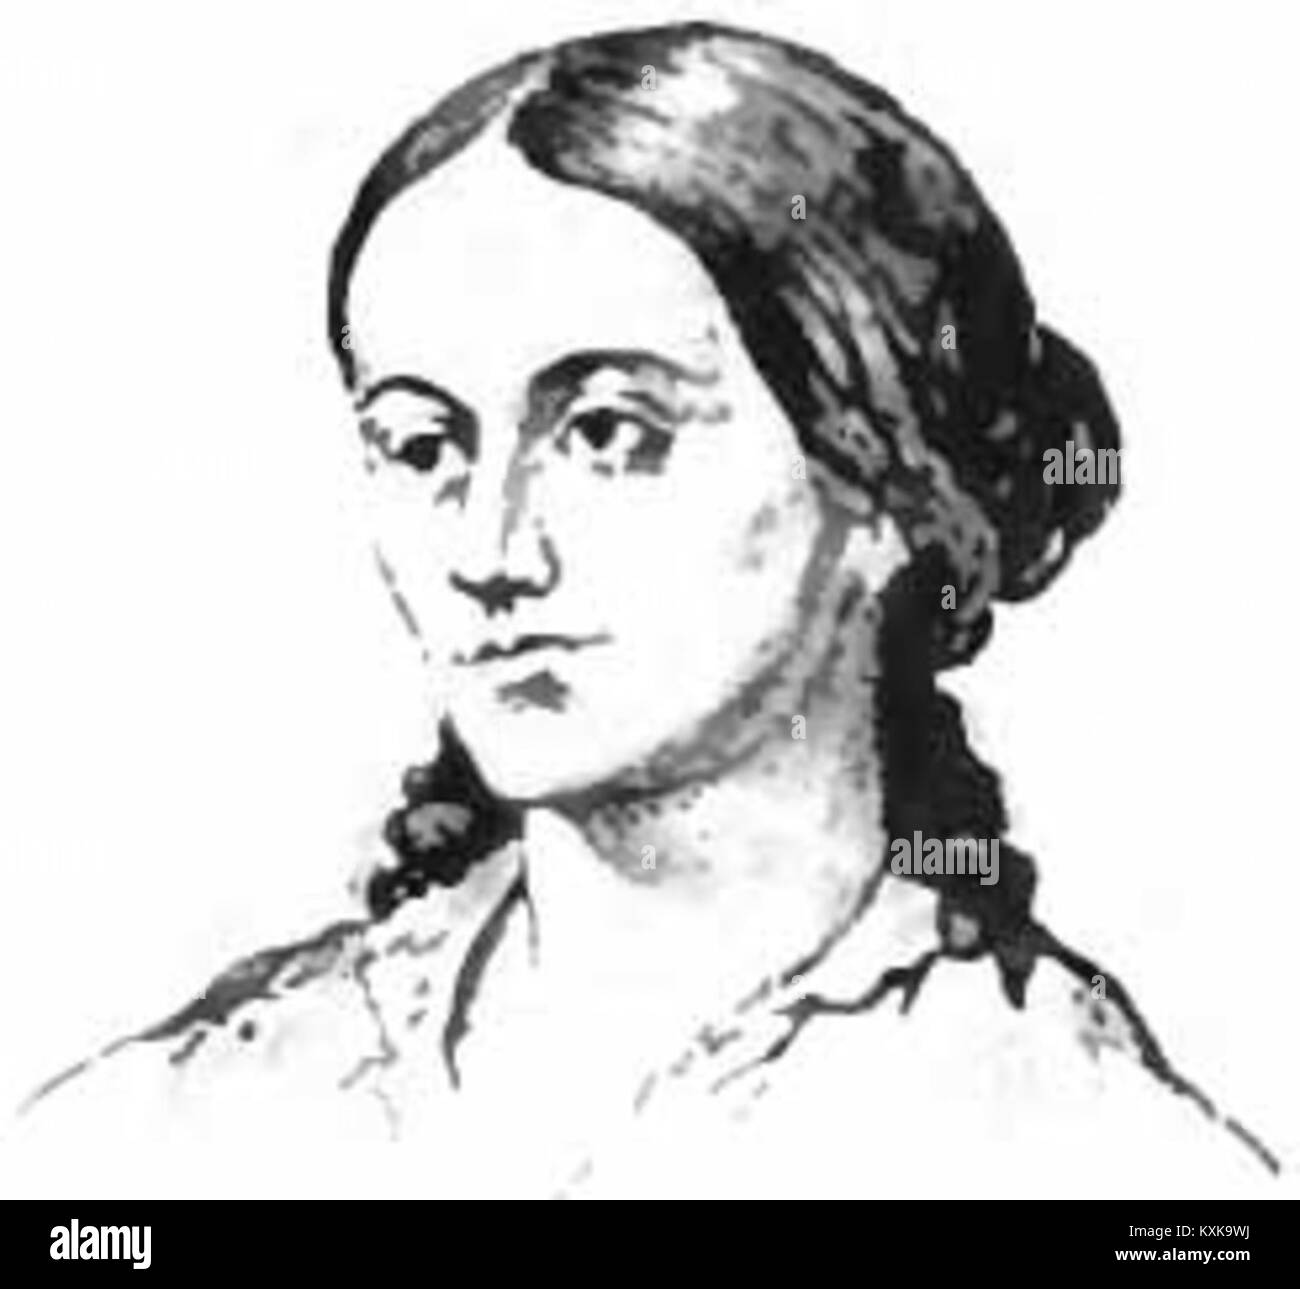 Margaret fuller Black and White Stock Photos & Images - Alamy